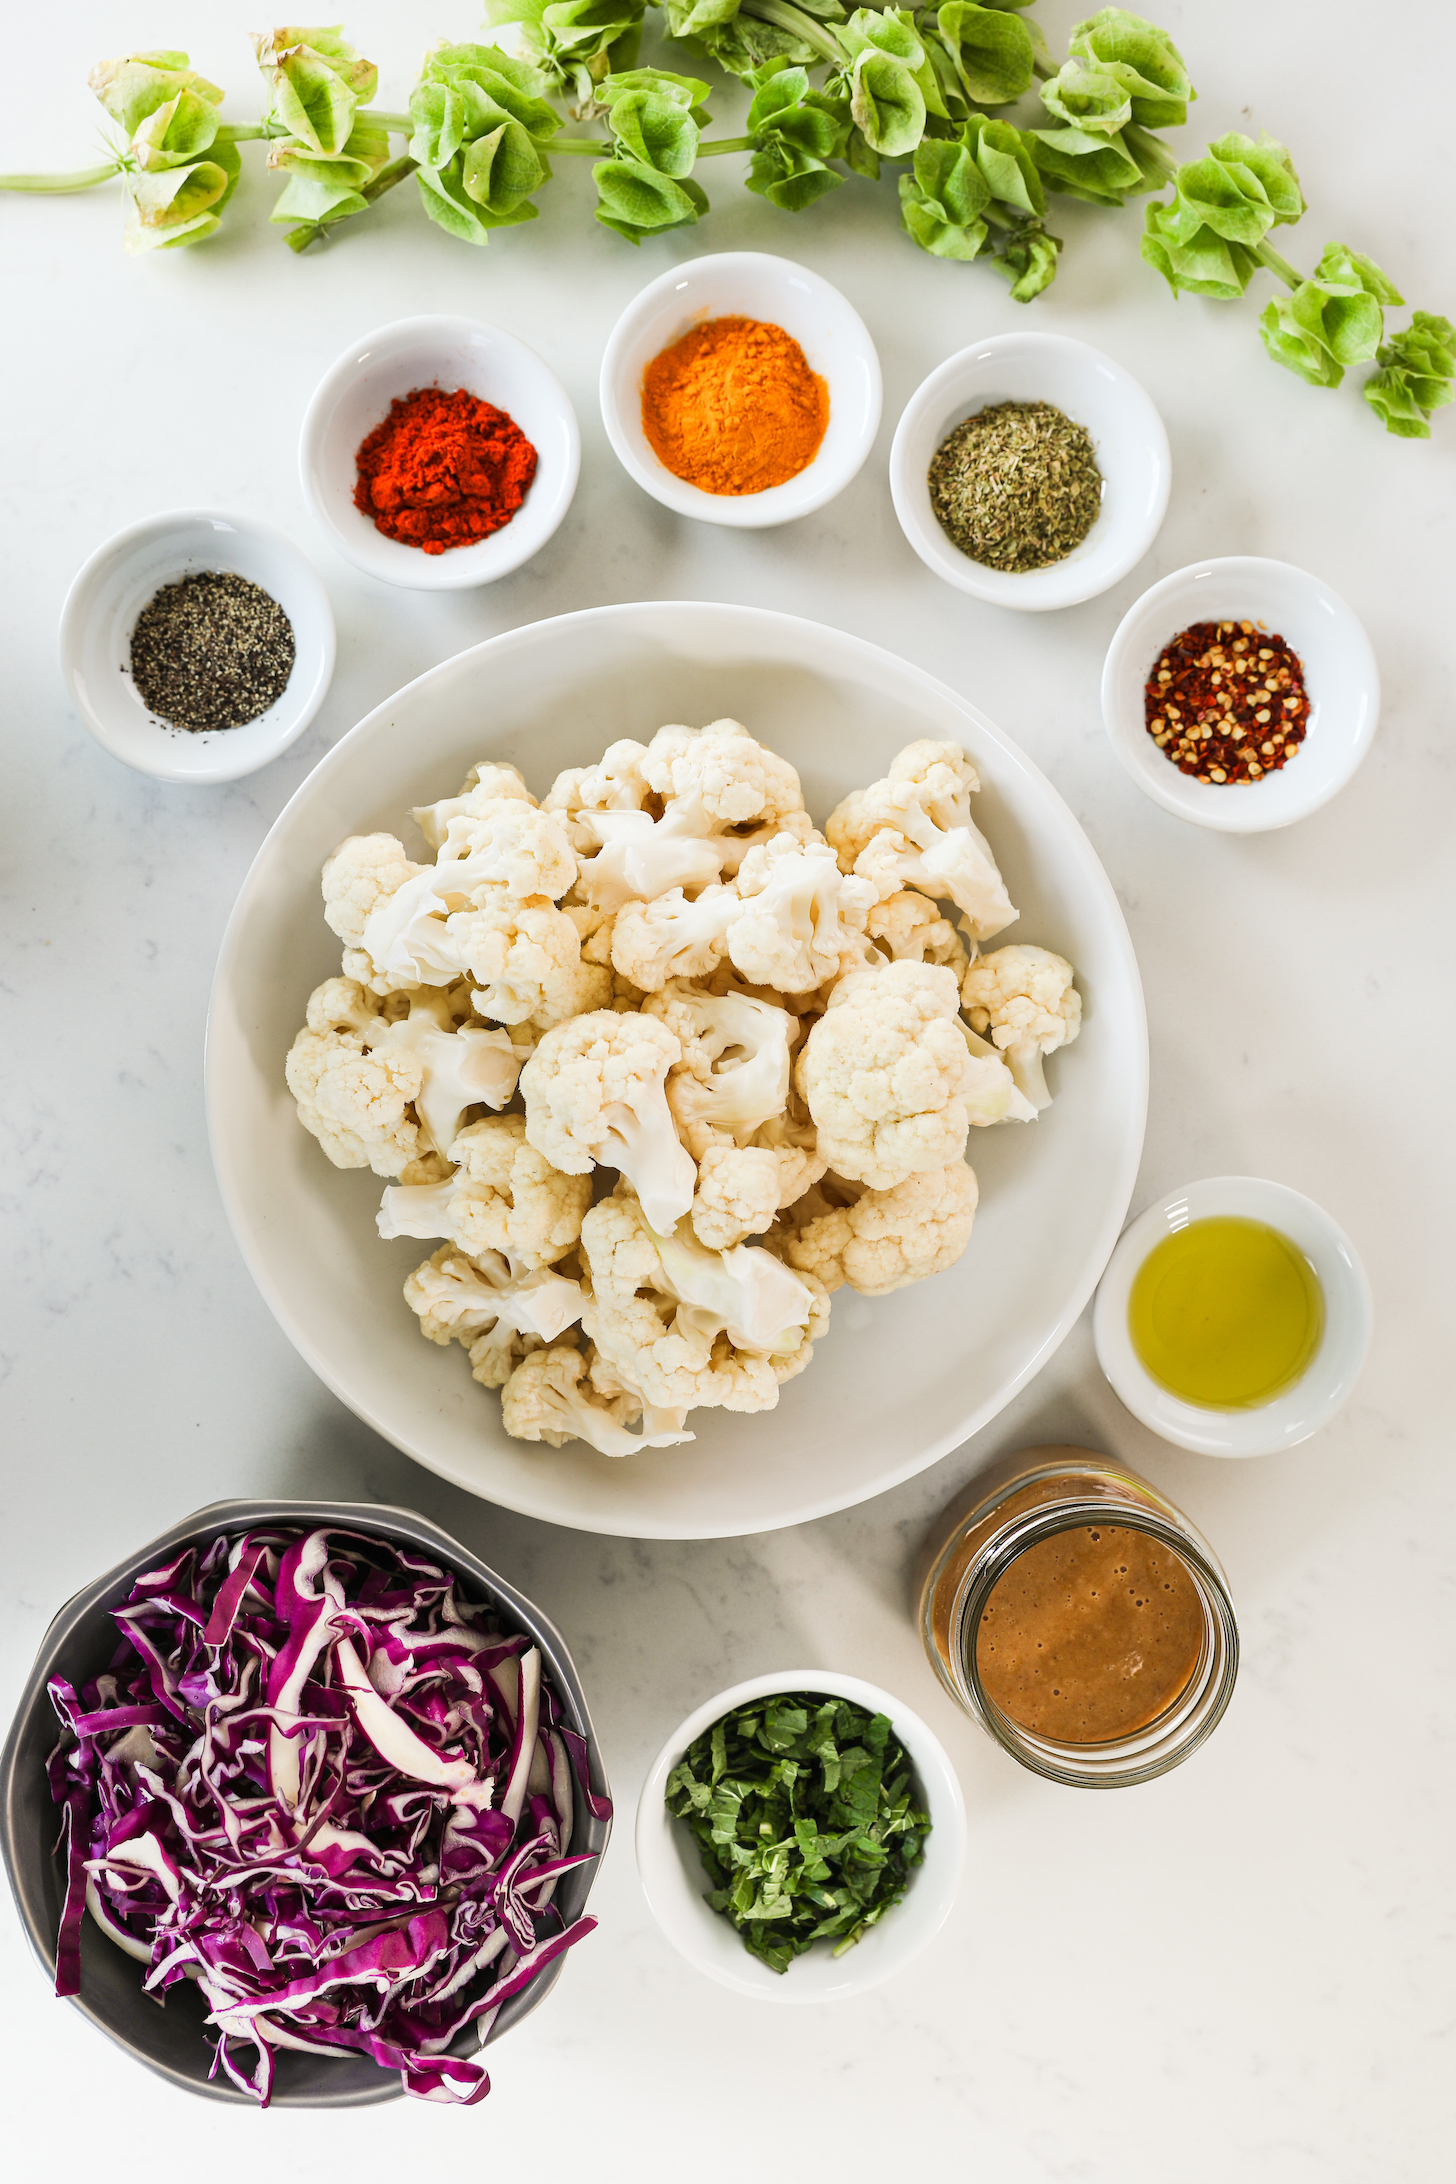 A selection of food ingredients like bowl of cauliflower and cabbage with different spices in ramekins.